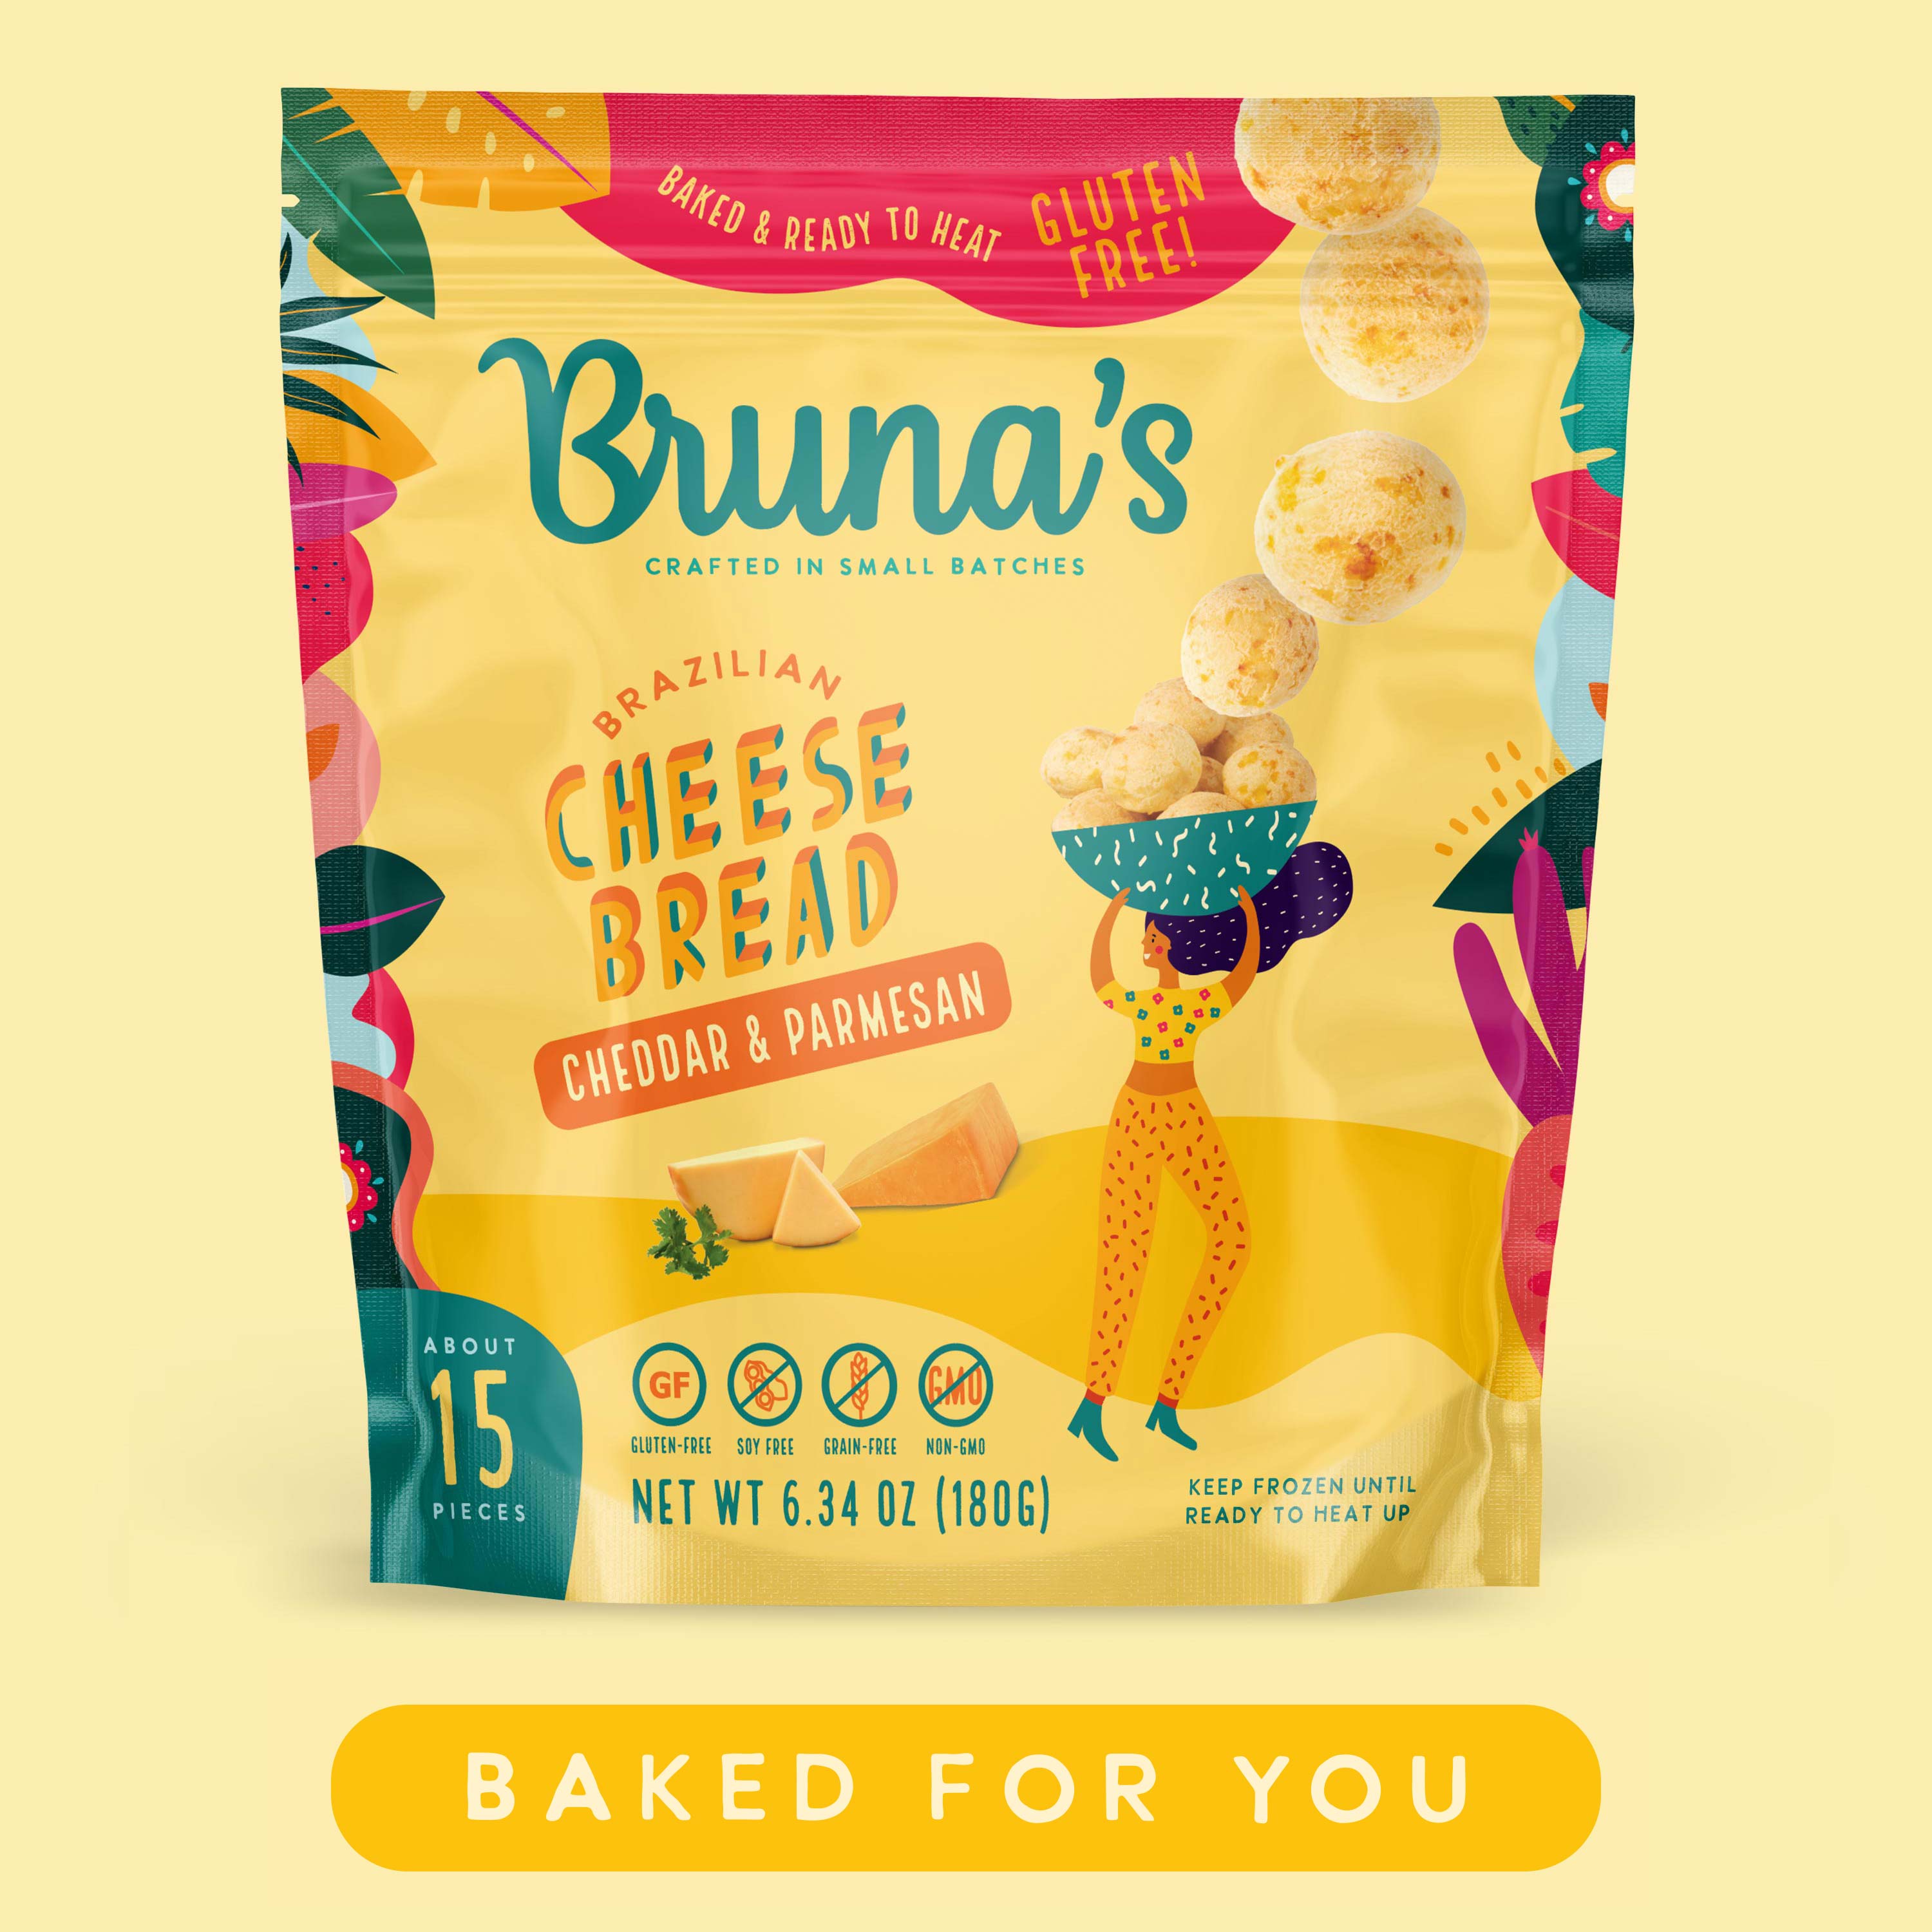 Bruna's Baked for You Cheddar & Parmesan Cheese Bread